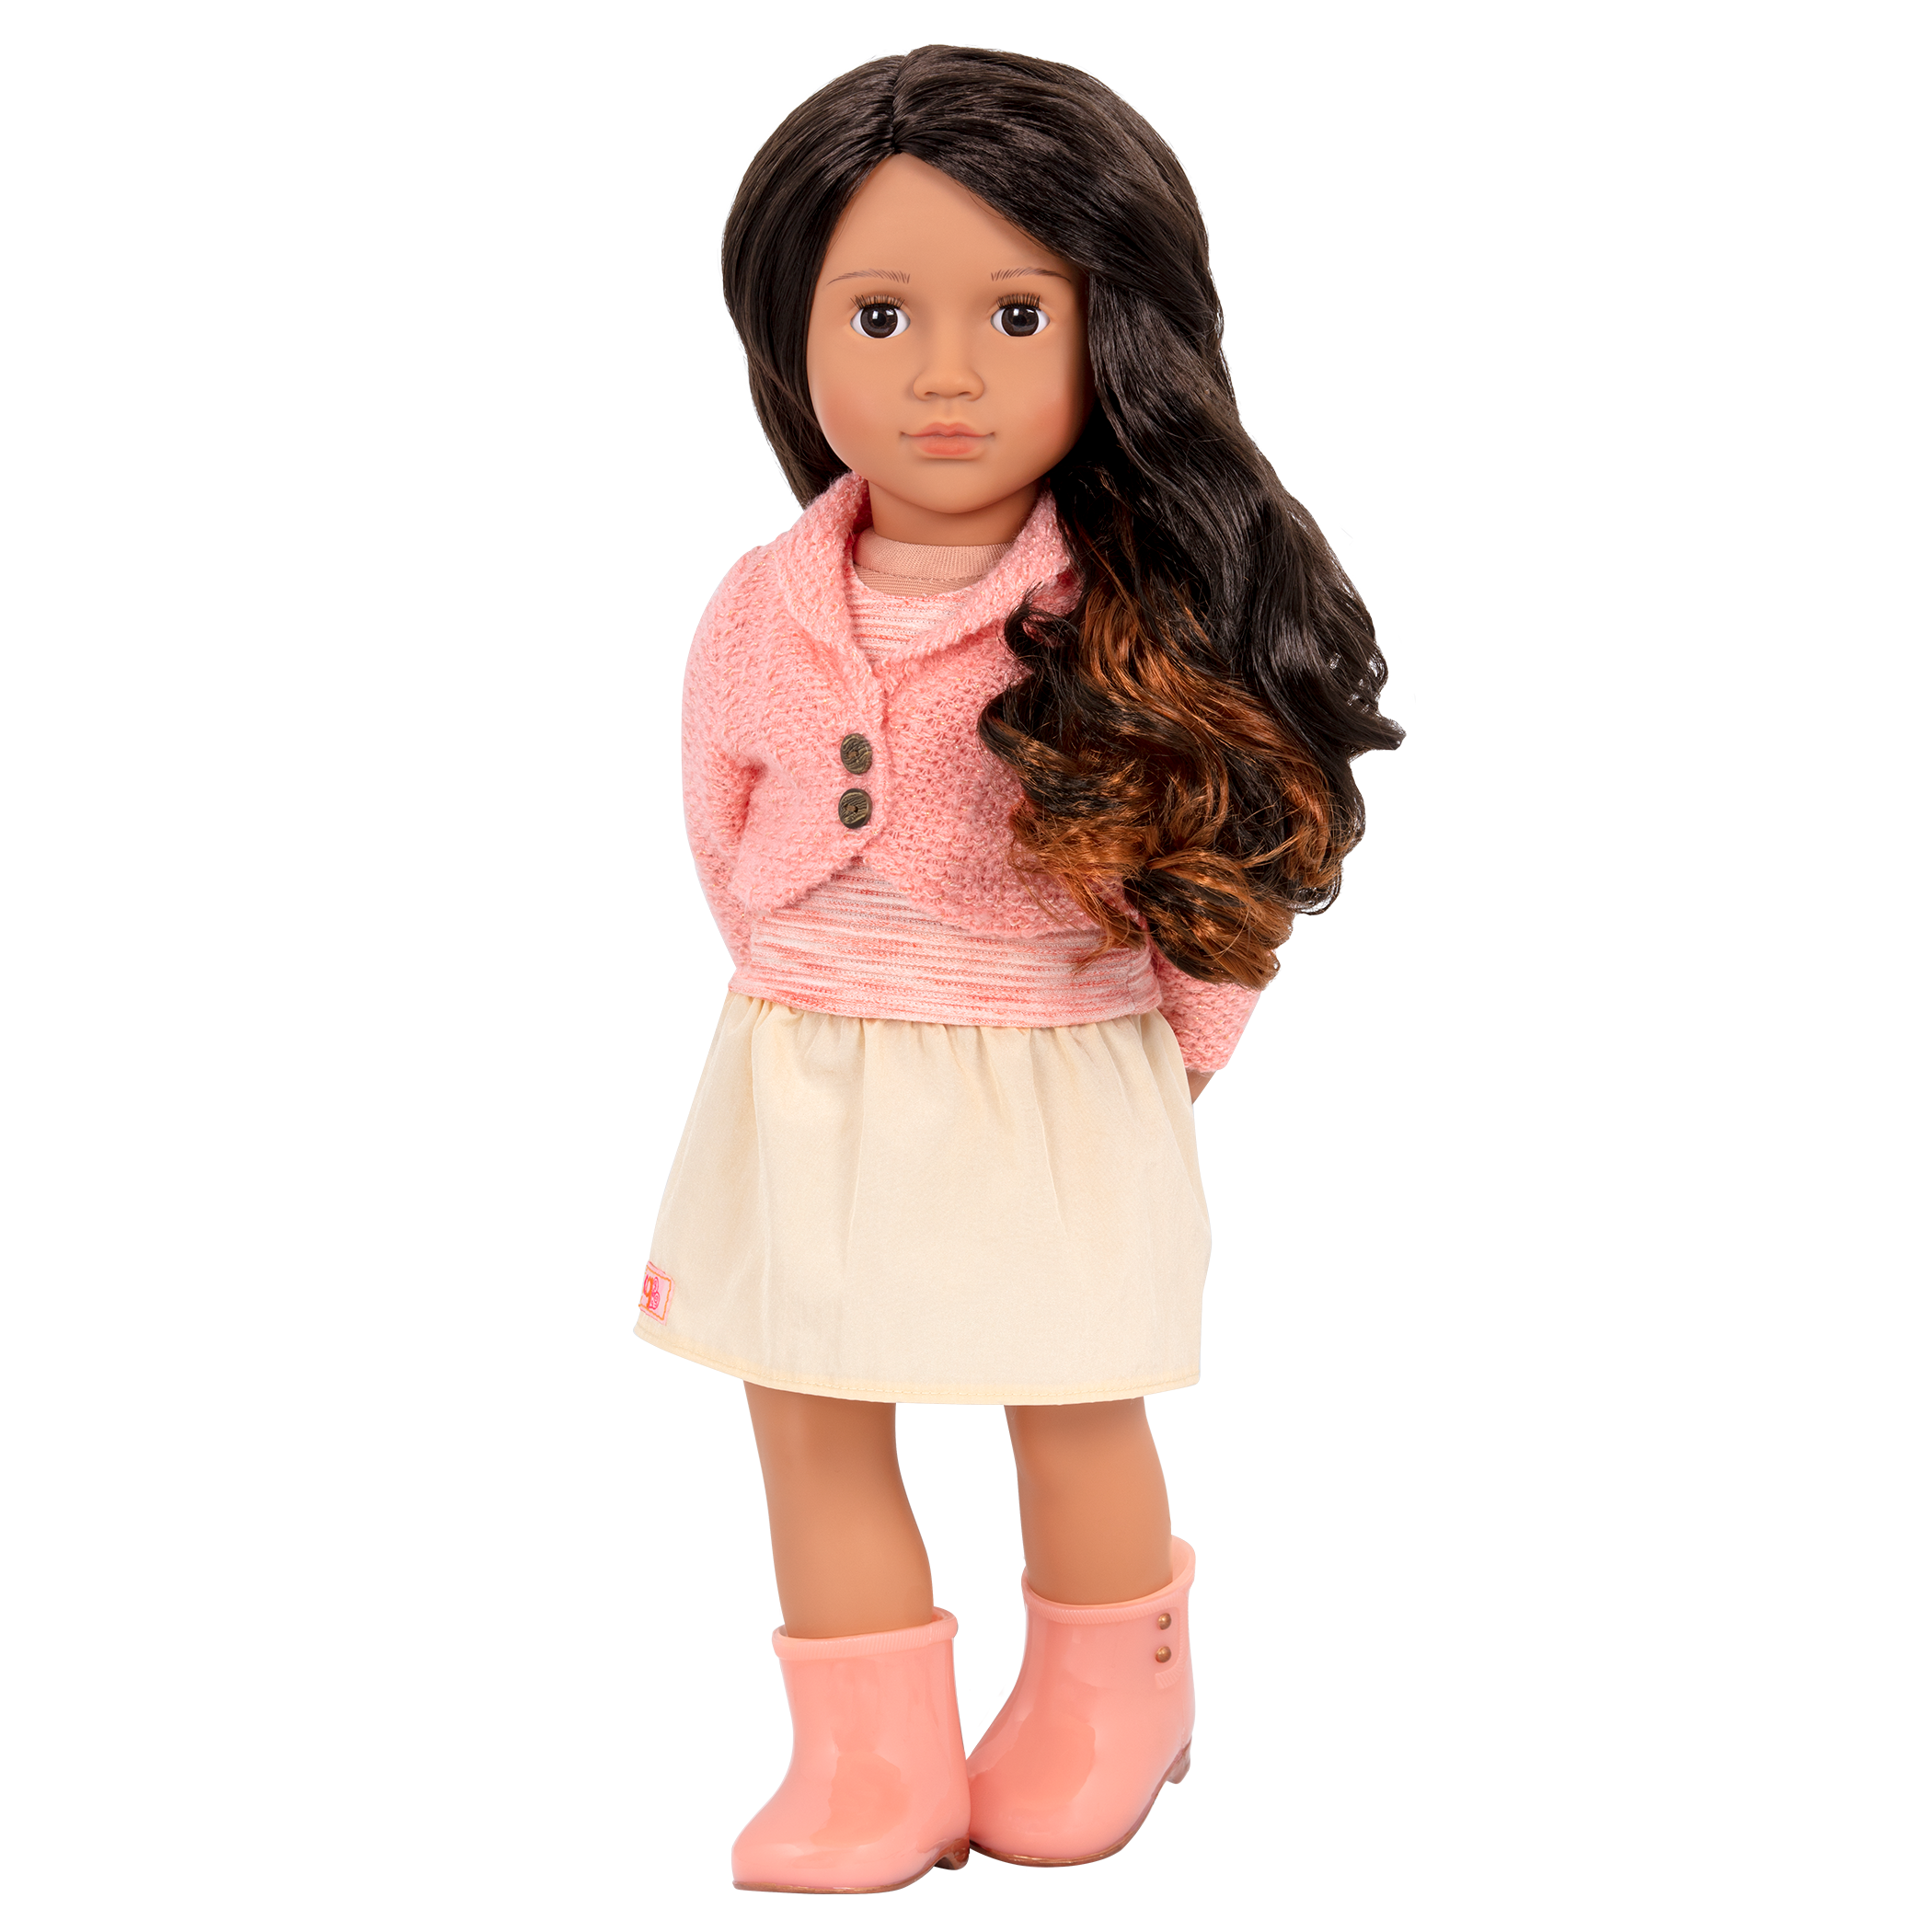 18 Inch Girl Doll, Poseable Fashion Doll with Fine Hair for Styling,  Clothes, Shoes, Purse and Accessories, Princess Doll for Girls and Kids